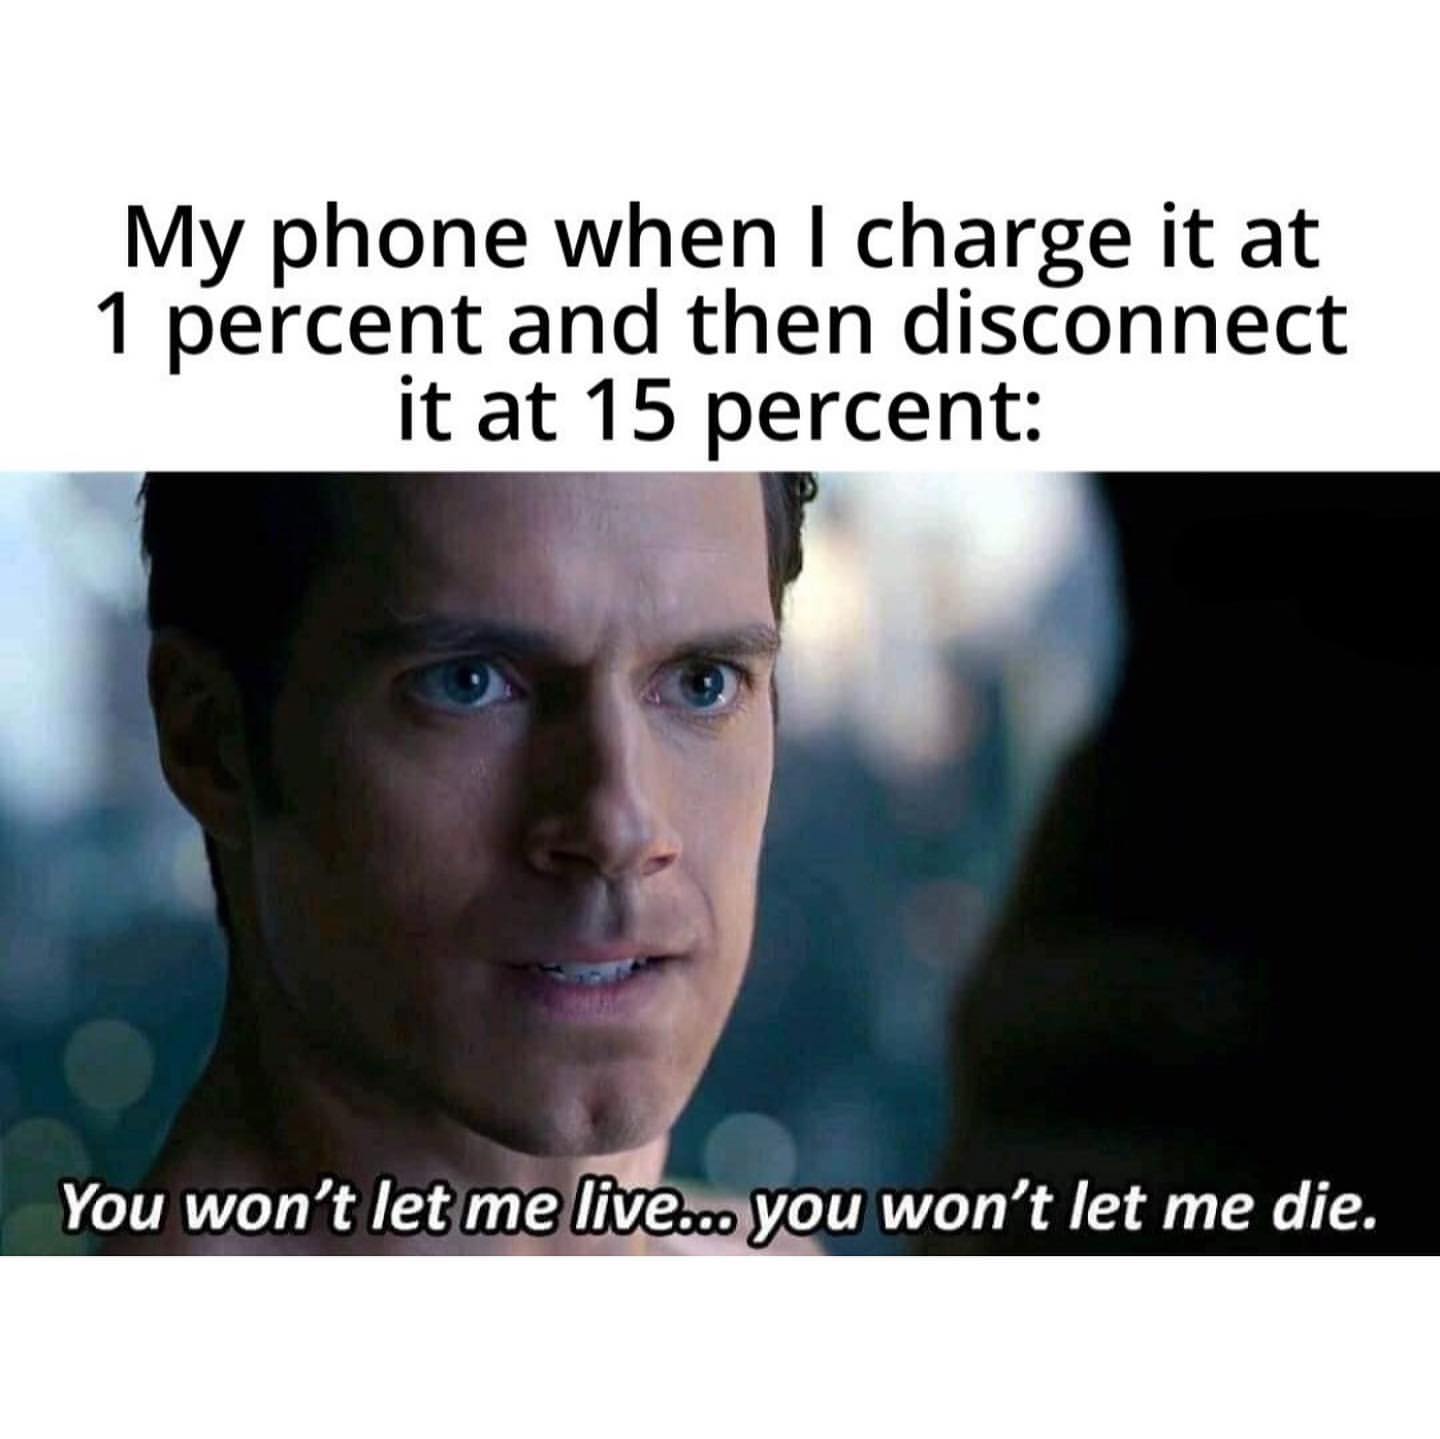 My phone when I charge it at 1 percent and then disconnect it at 15 percent: You won't let me live... you won't let me die.